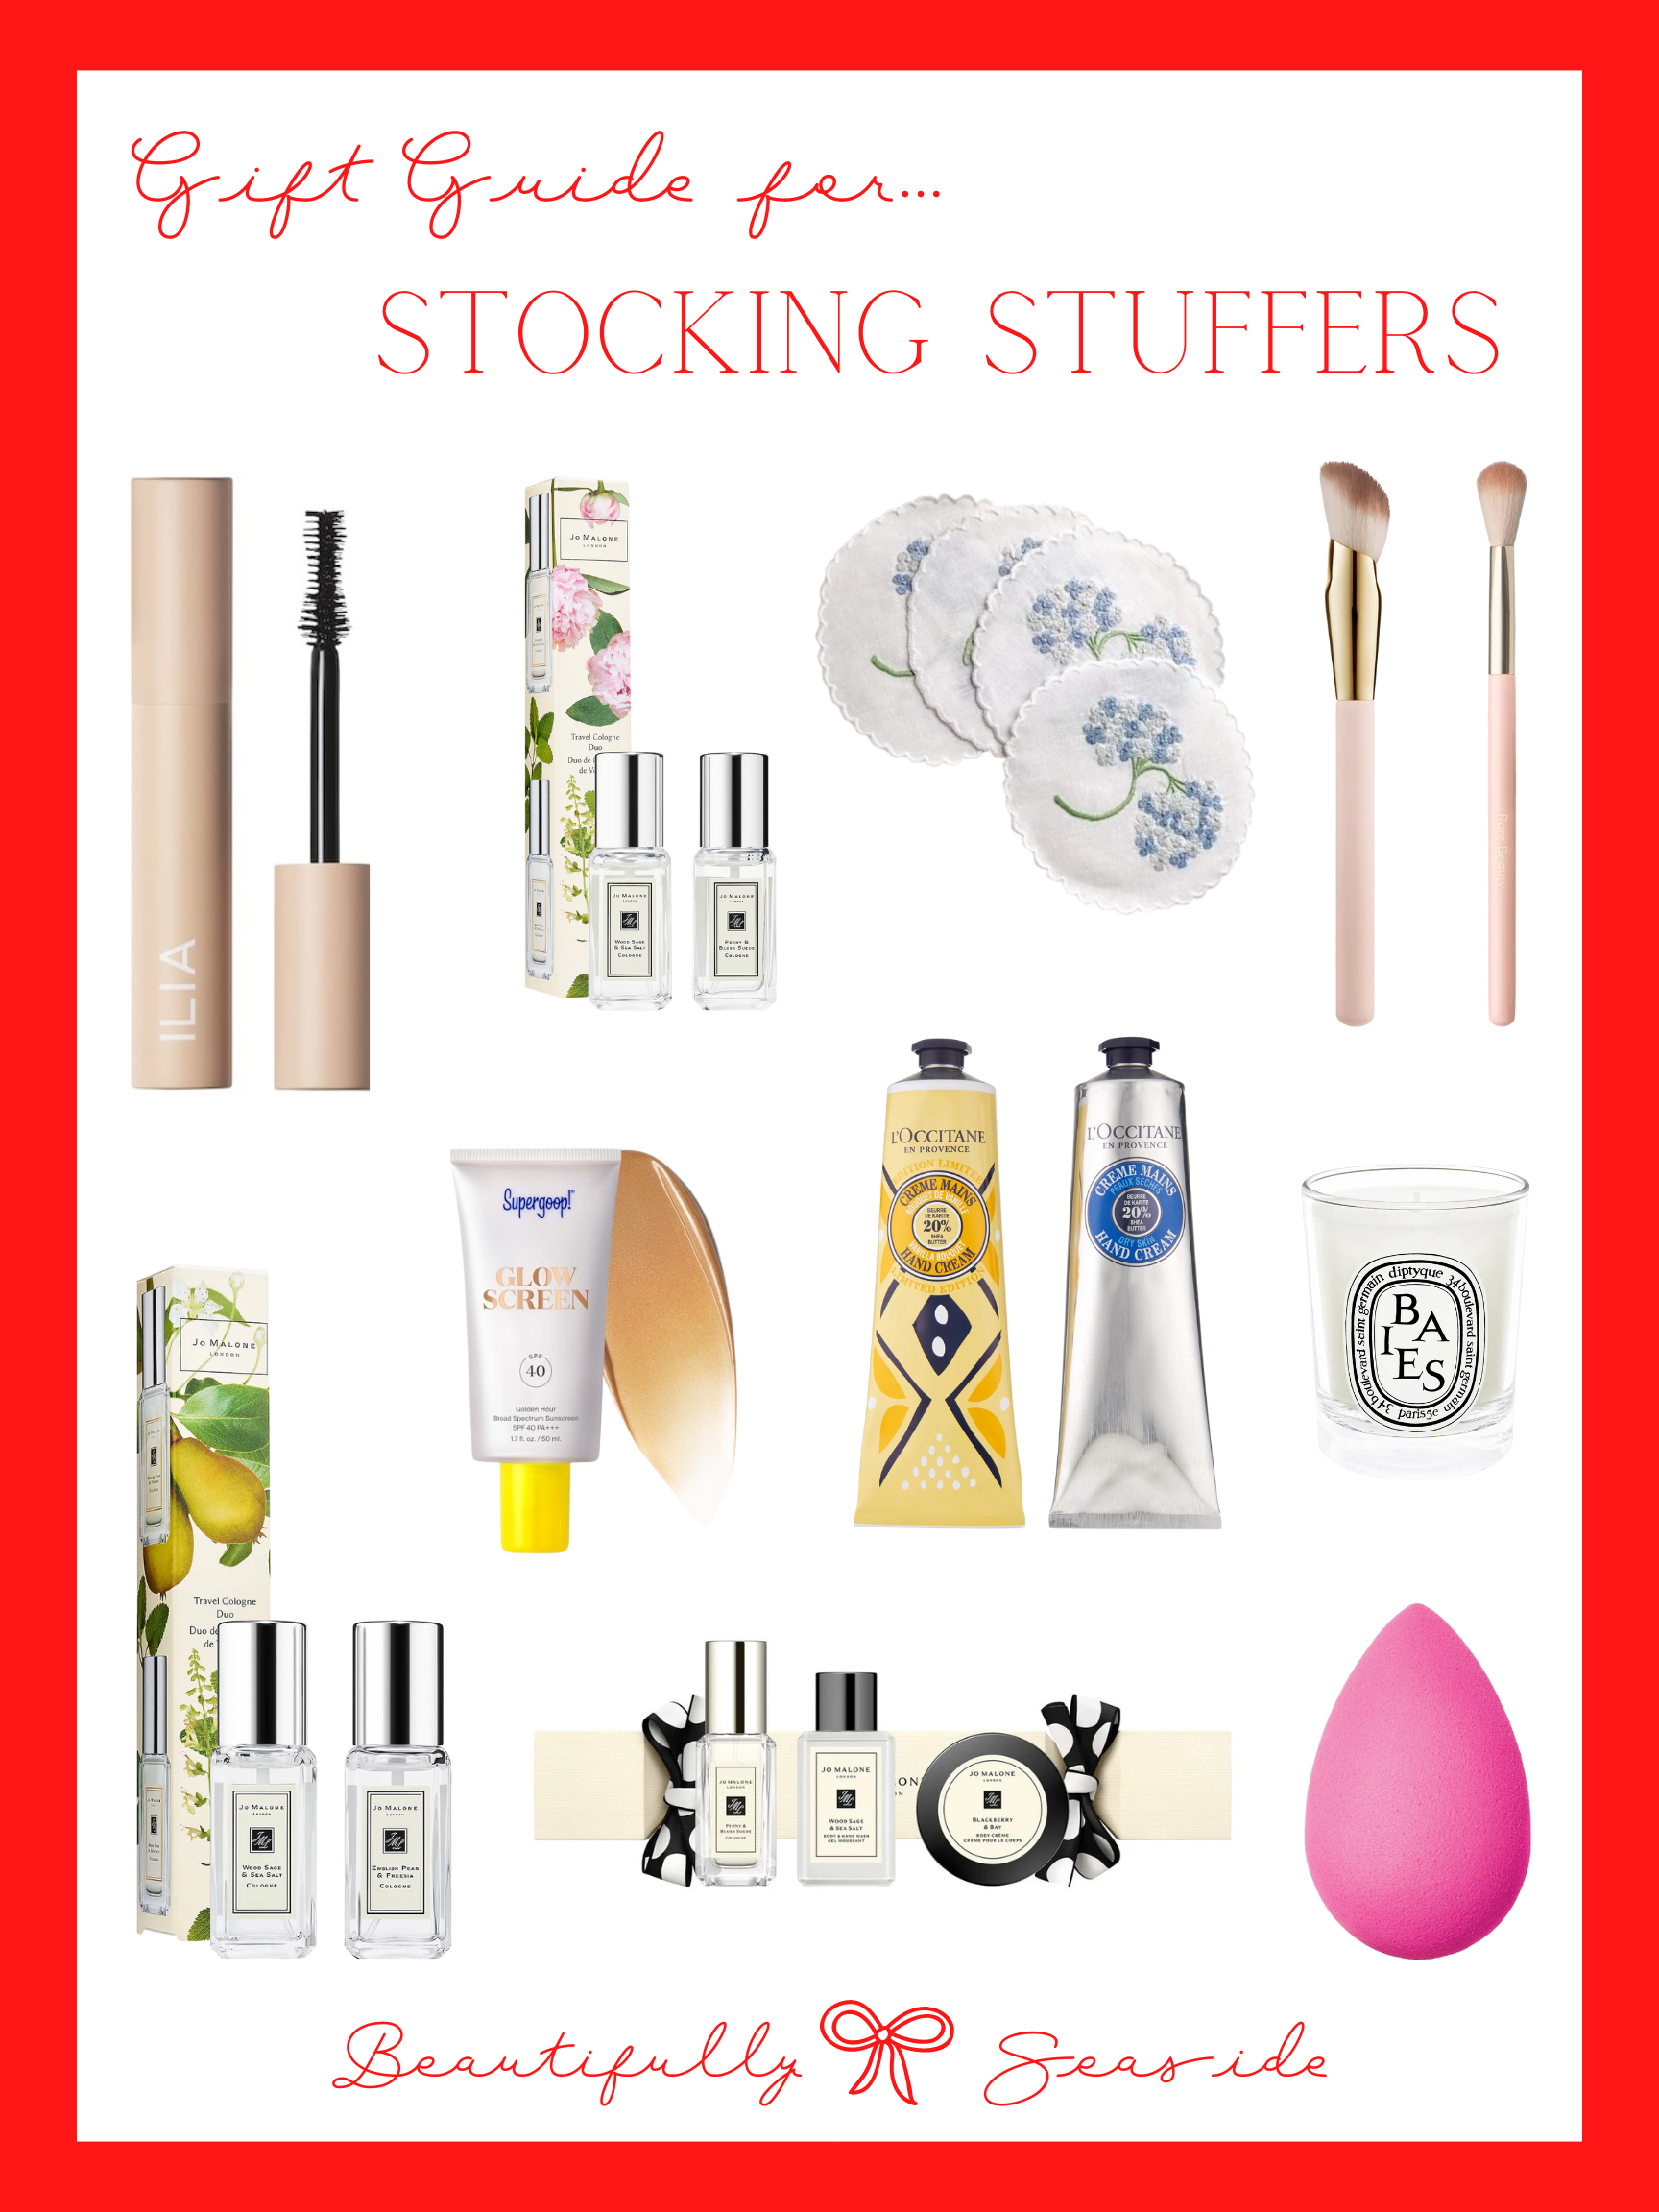 Desiree Leone of Beautifully Seaside features a stocking stuffer holiday gift guide for the girls that they will love!